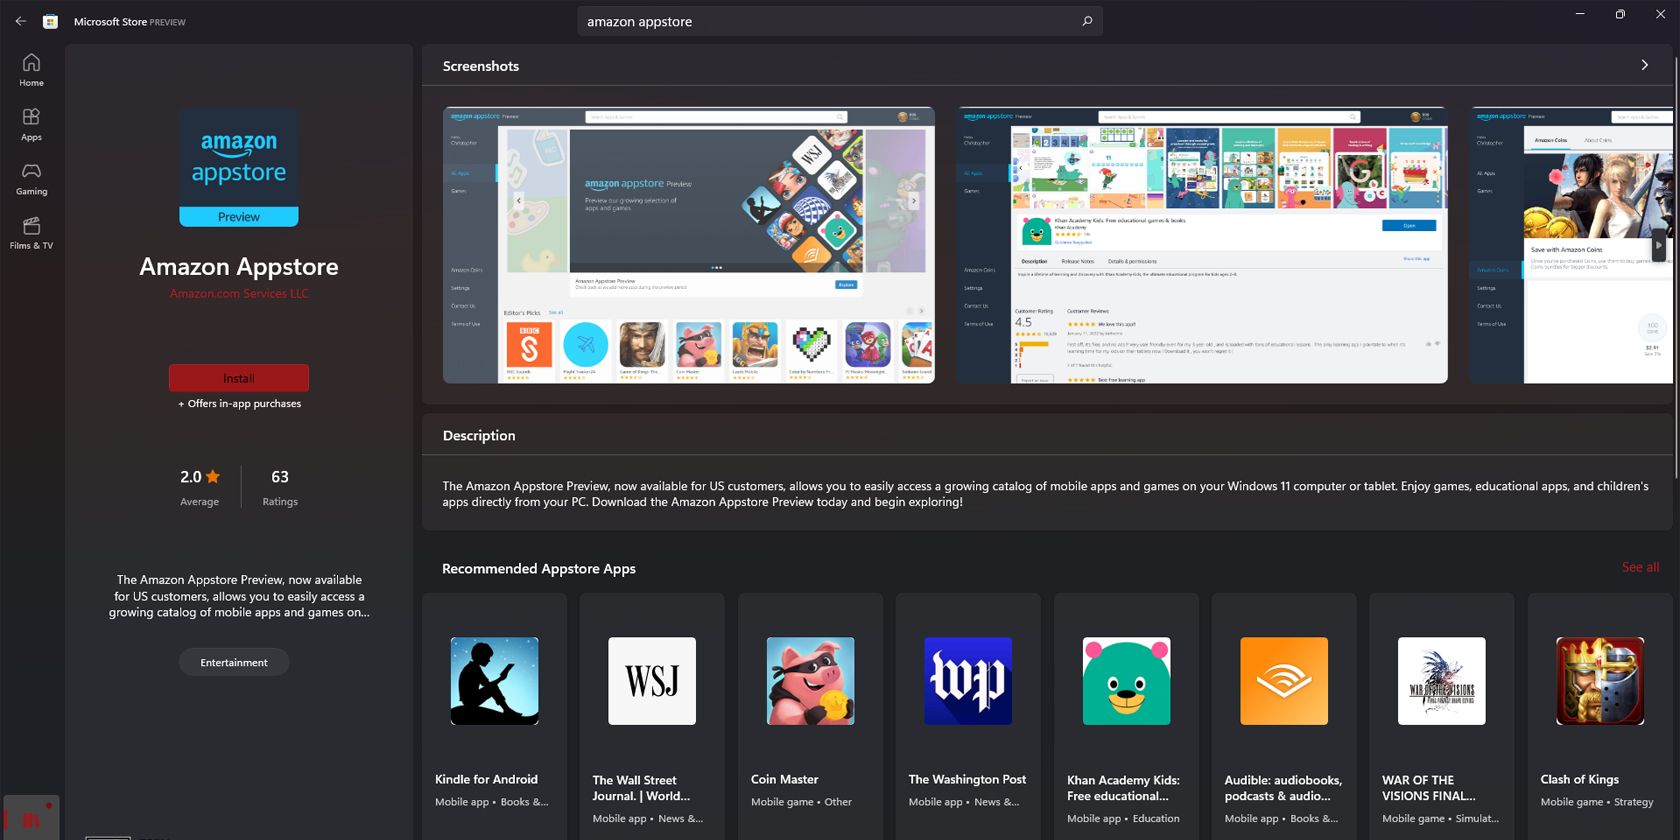 How to Install the Amazon Appstore on Windows 11